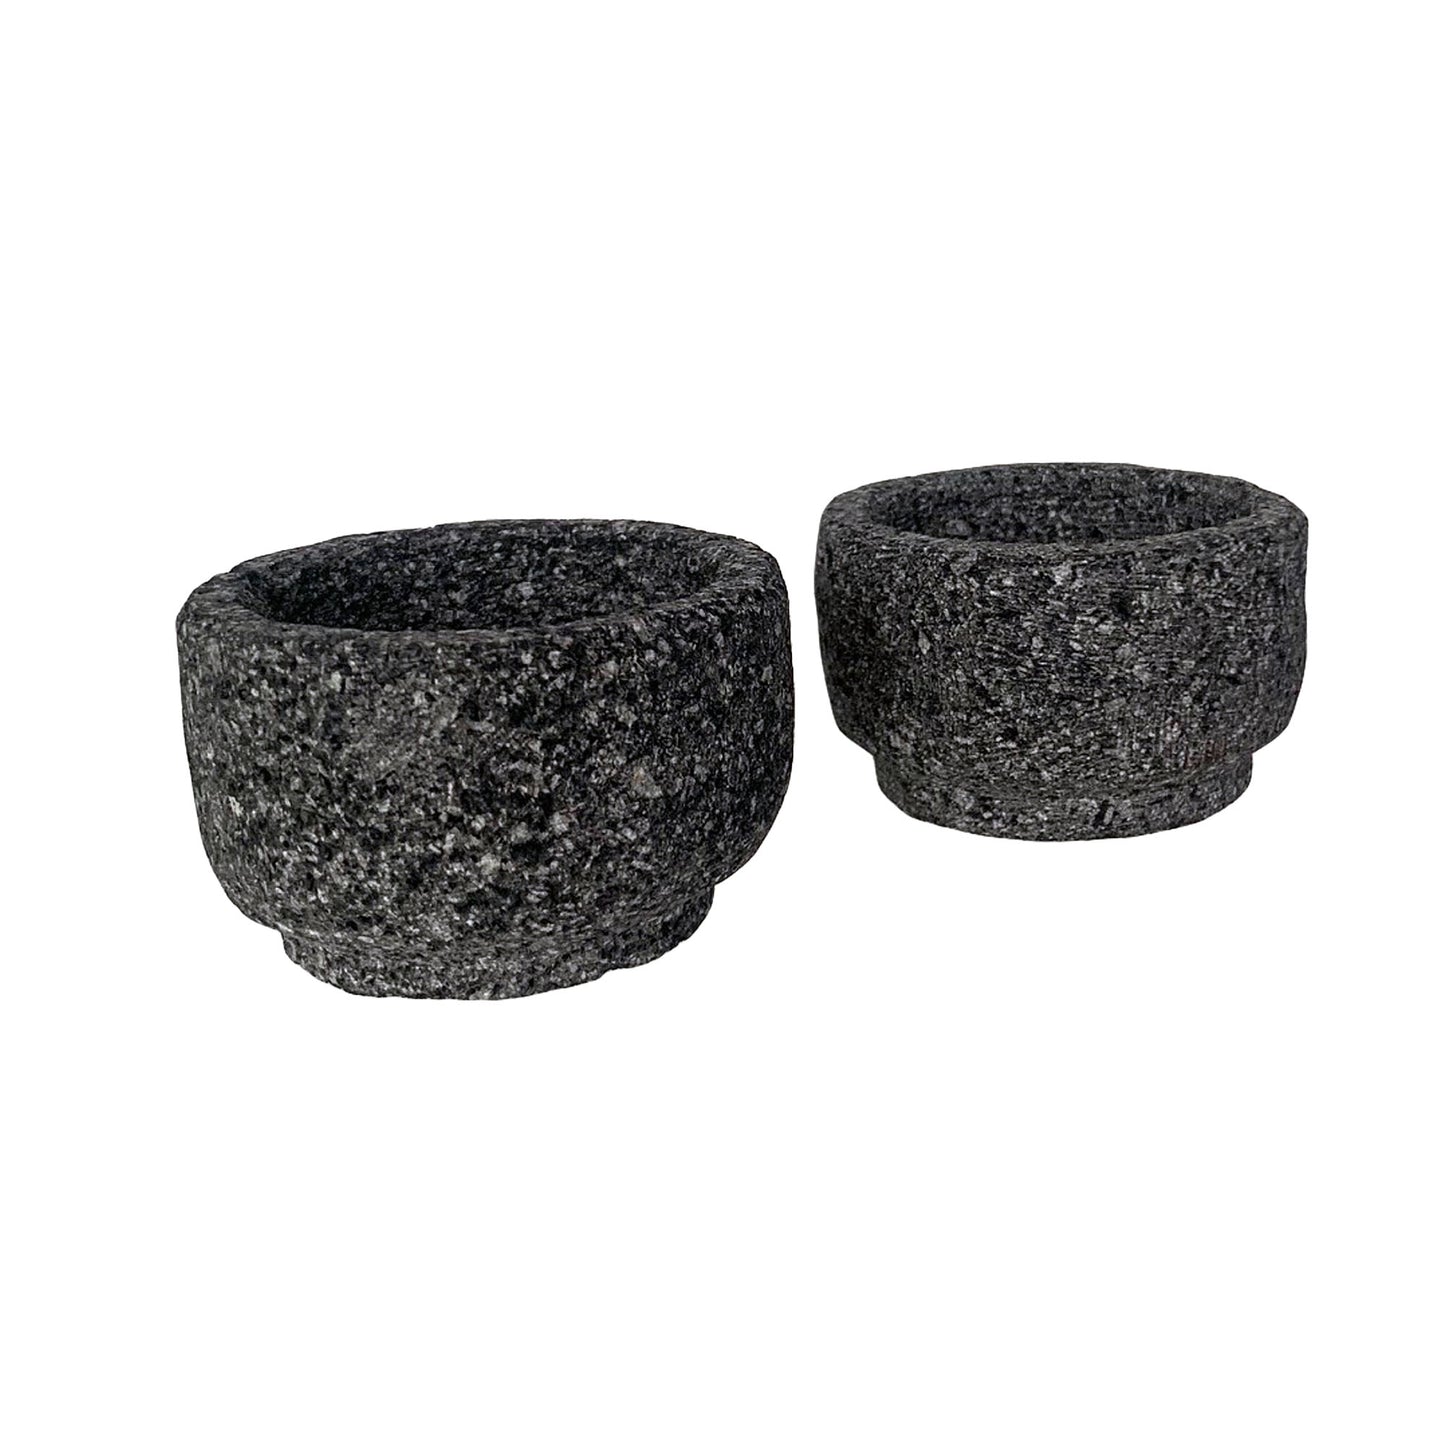 Volcanic Stone Mezcal Copitas | Stone Shot Glasses Hand Carved in Mexico | Set of 2